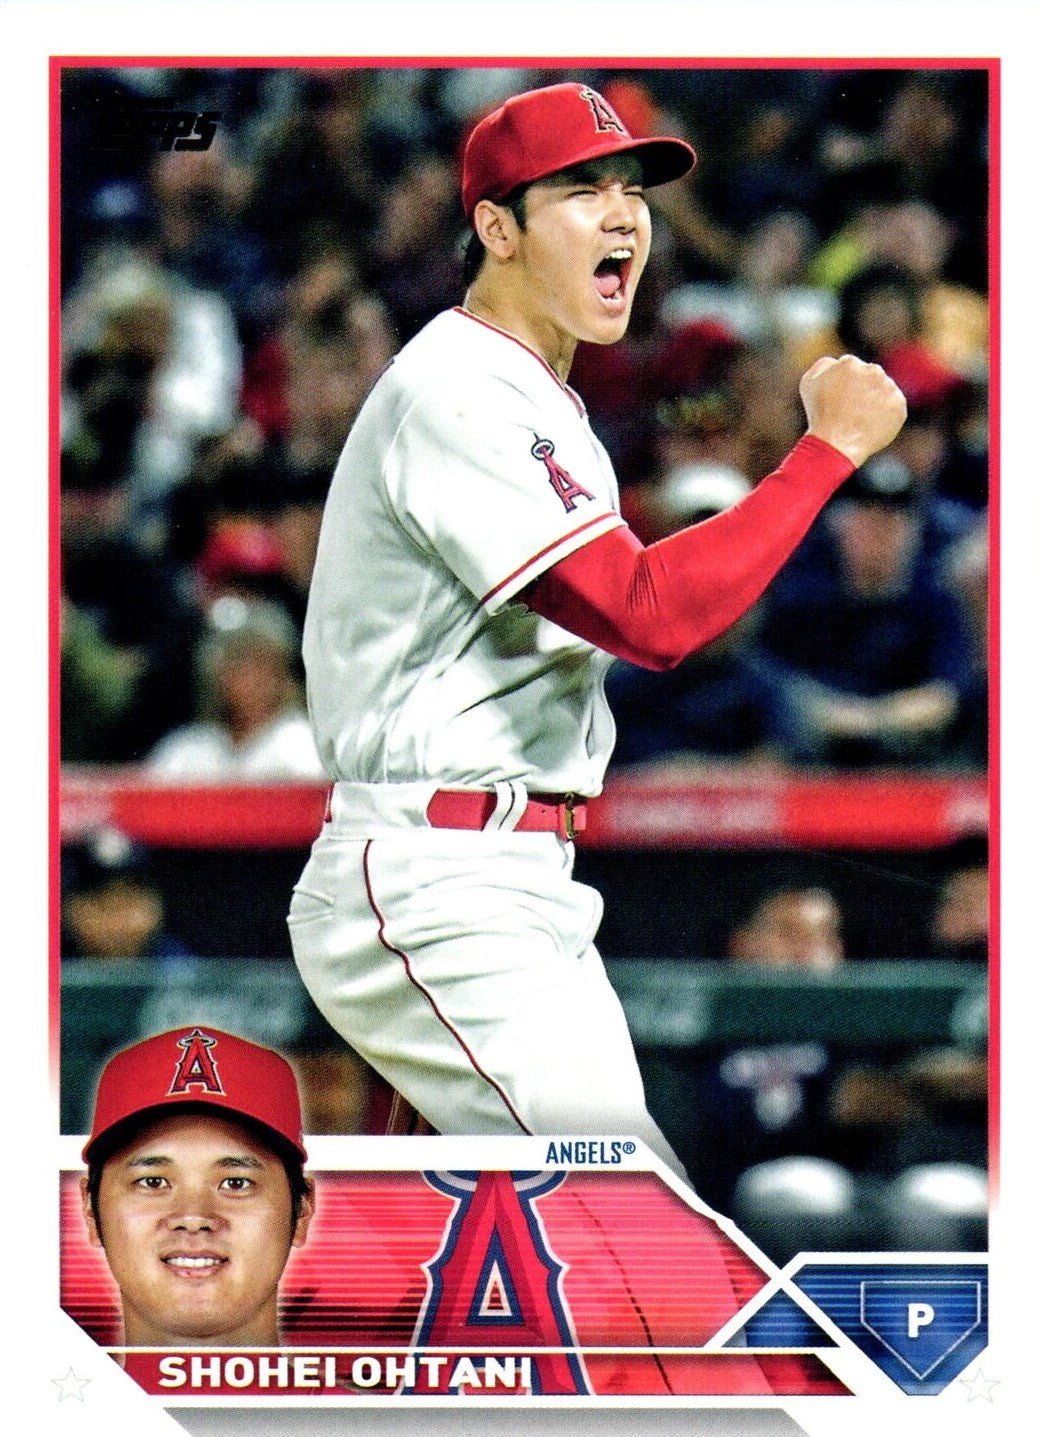 2023 Shohei Ohtani Game Used Throwback Jersey (7/22/23 vs PIT)